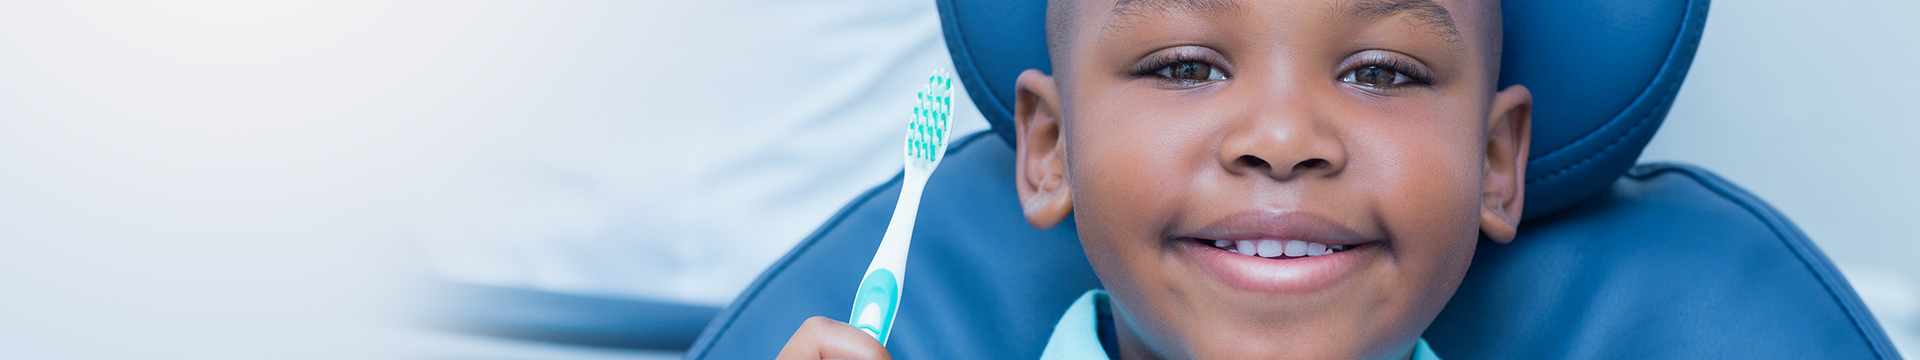 Young child in dental office smiling with toothbrush